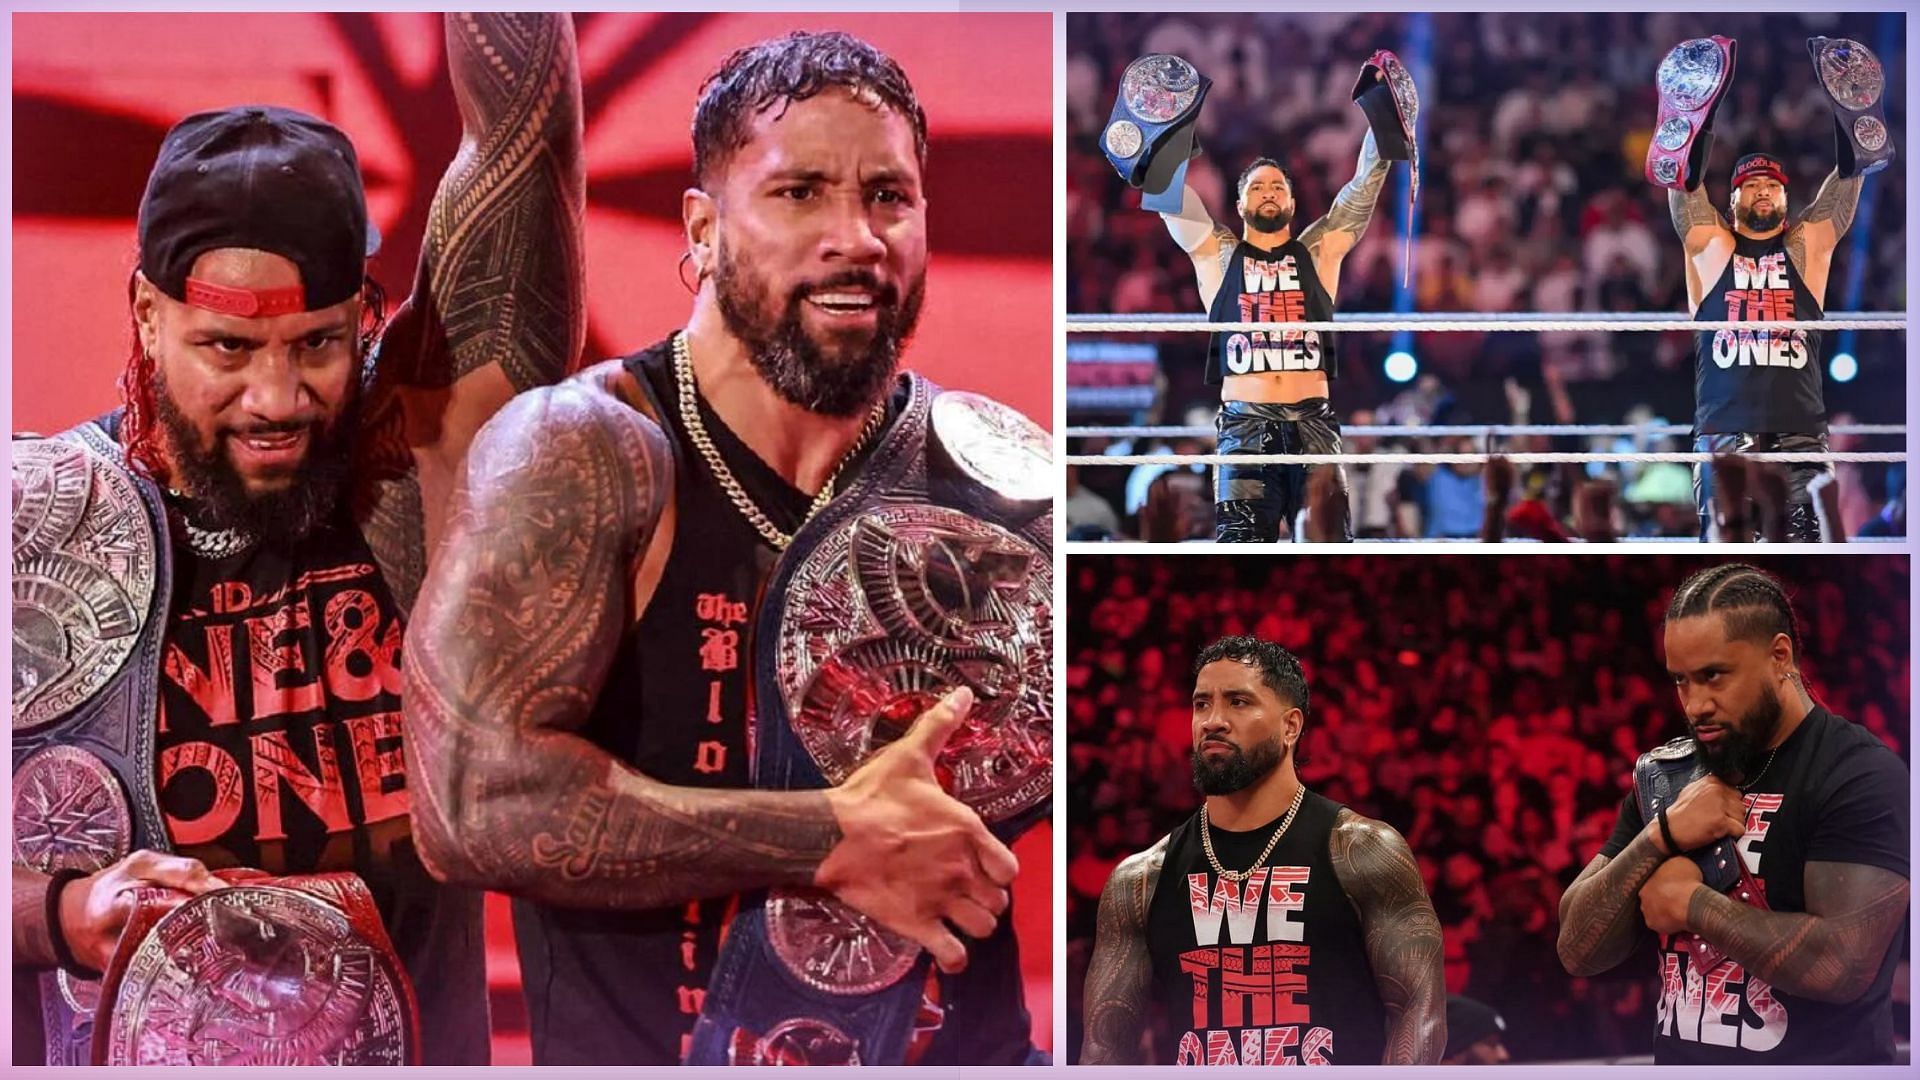 The Usos are the longest-reigning tag team champion in WWE.